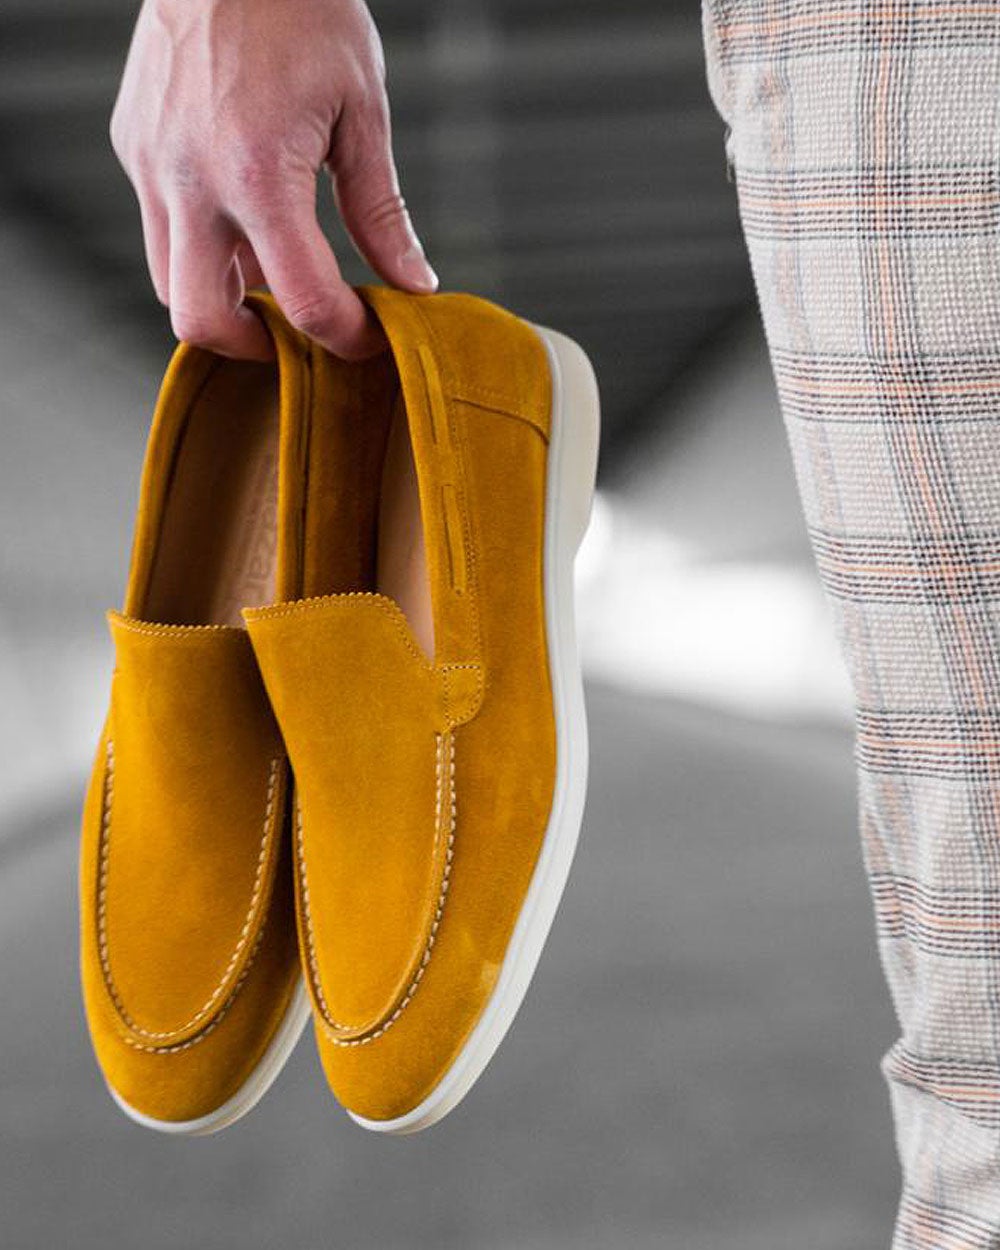 Mustard yellow suede moccasin shoes with white rubber sole for men